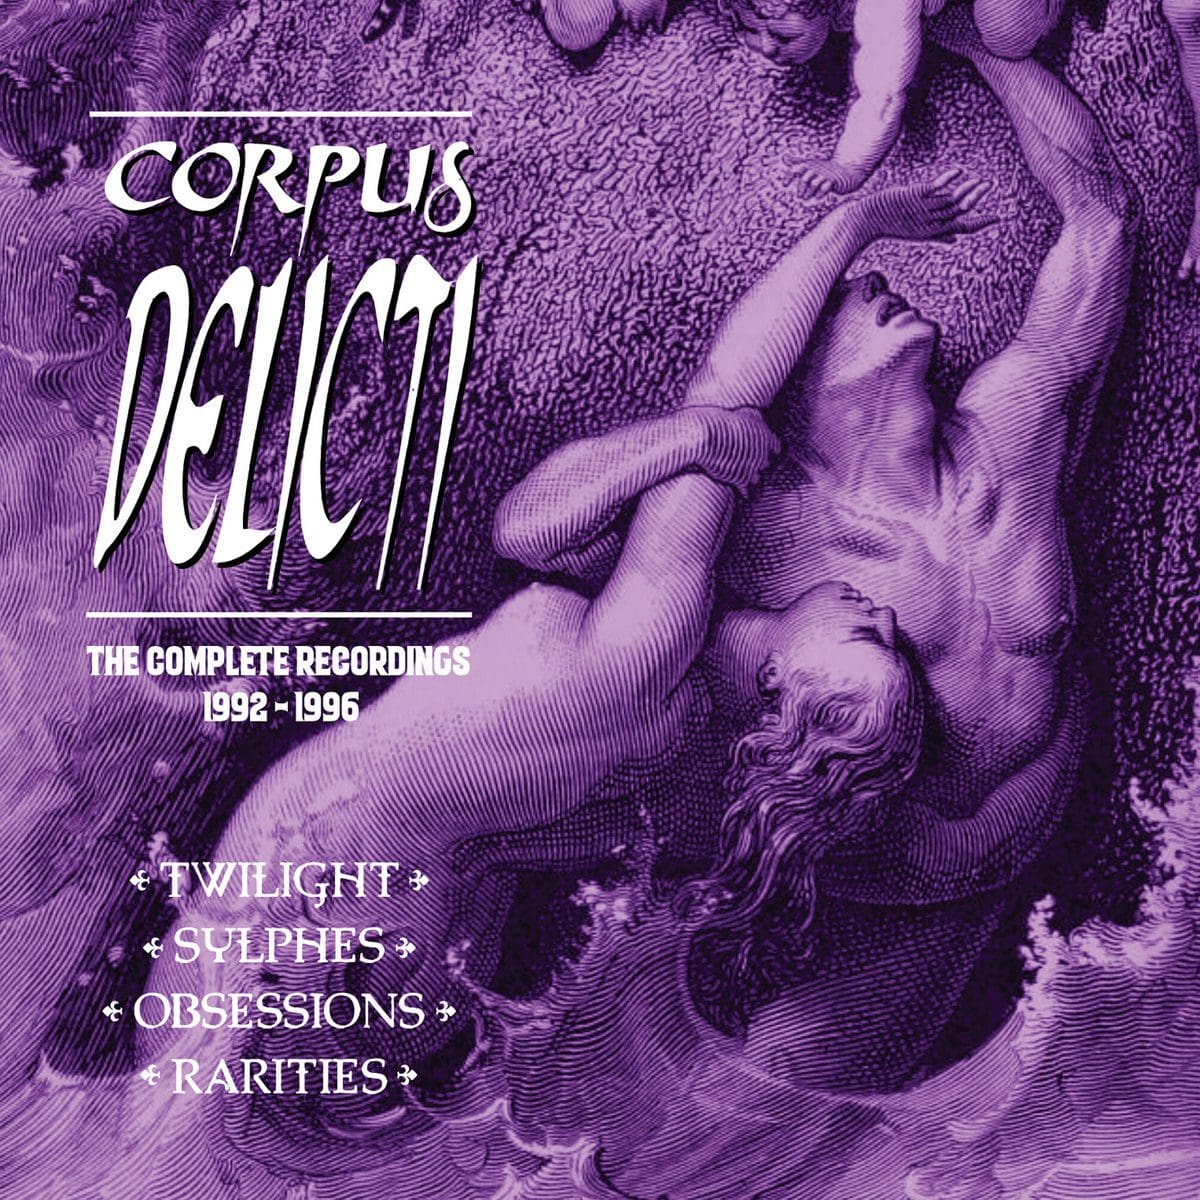 Corpus Delicti sees complete recordings released as 4CD boxset